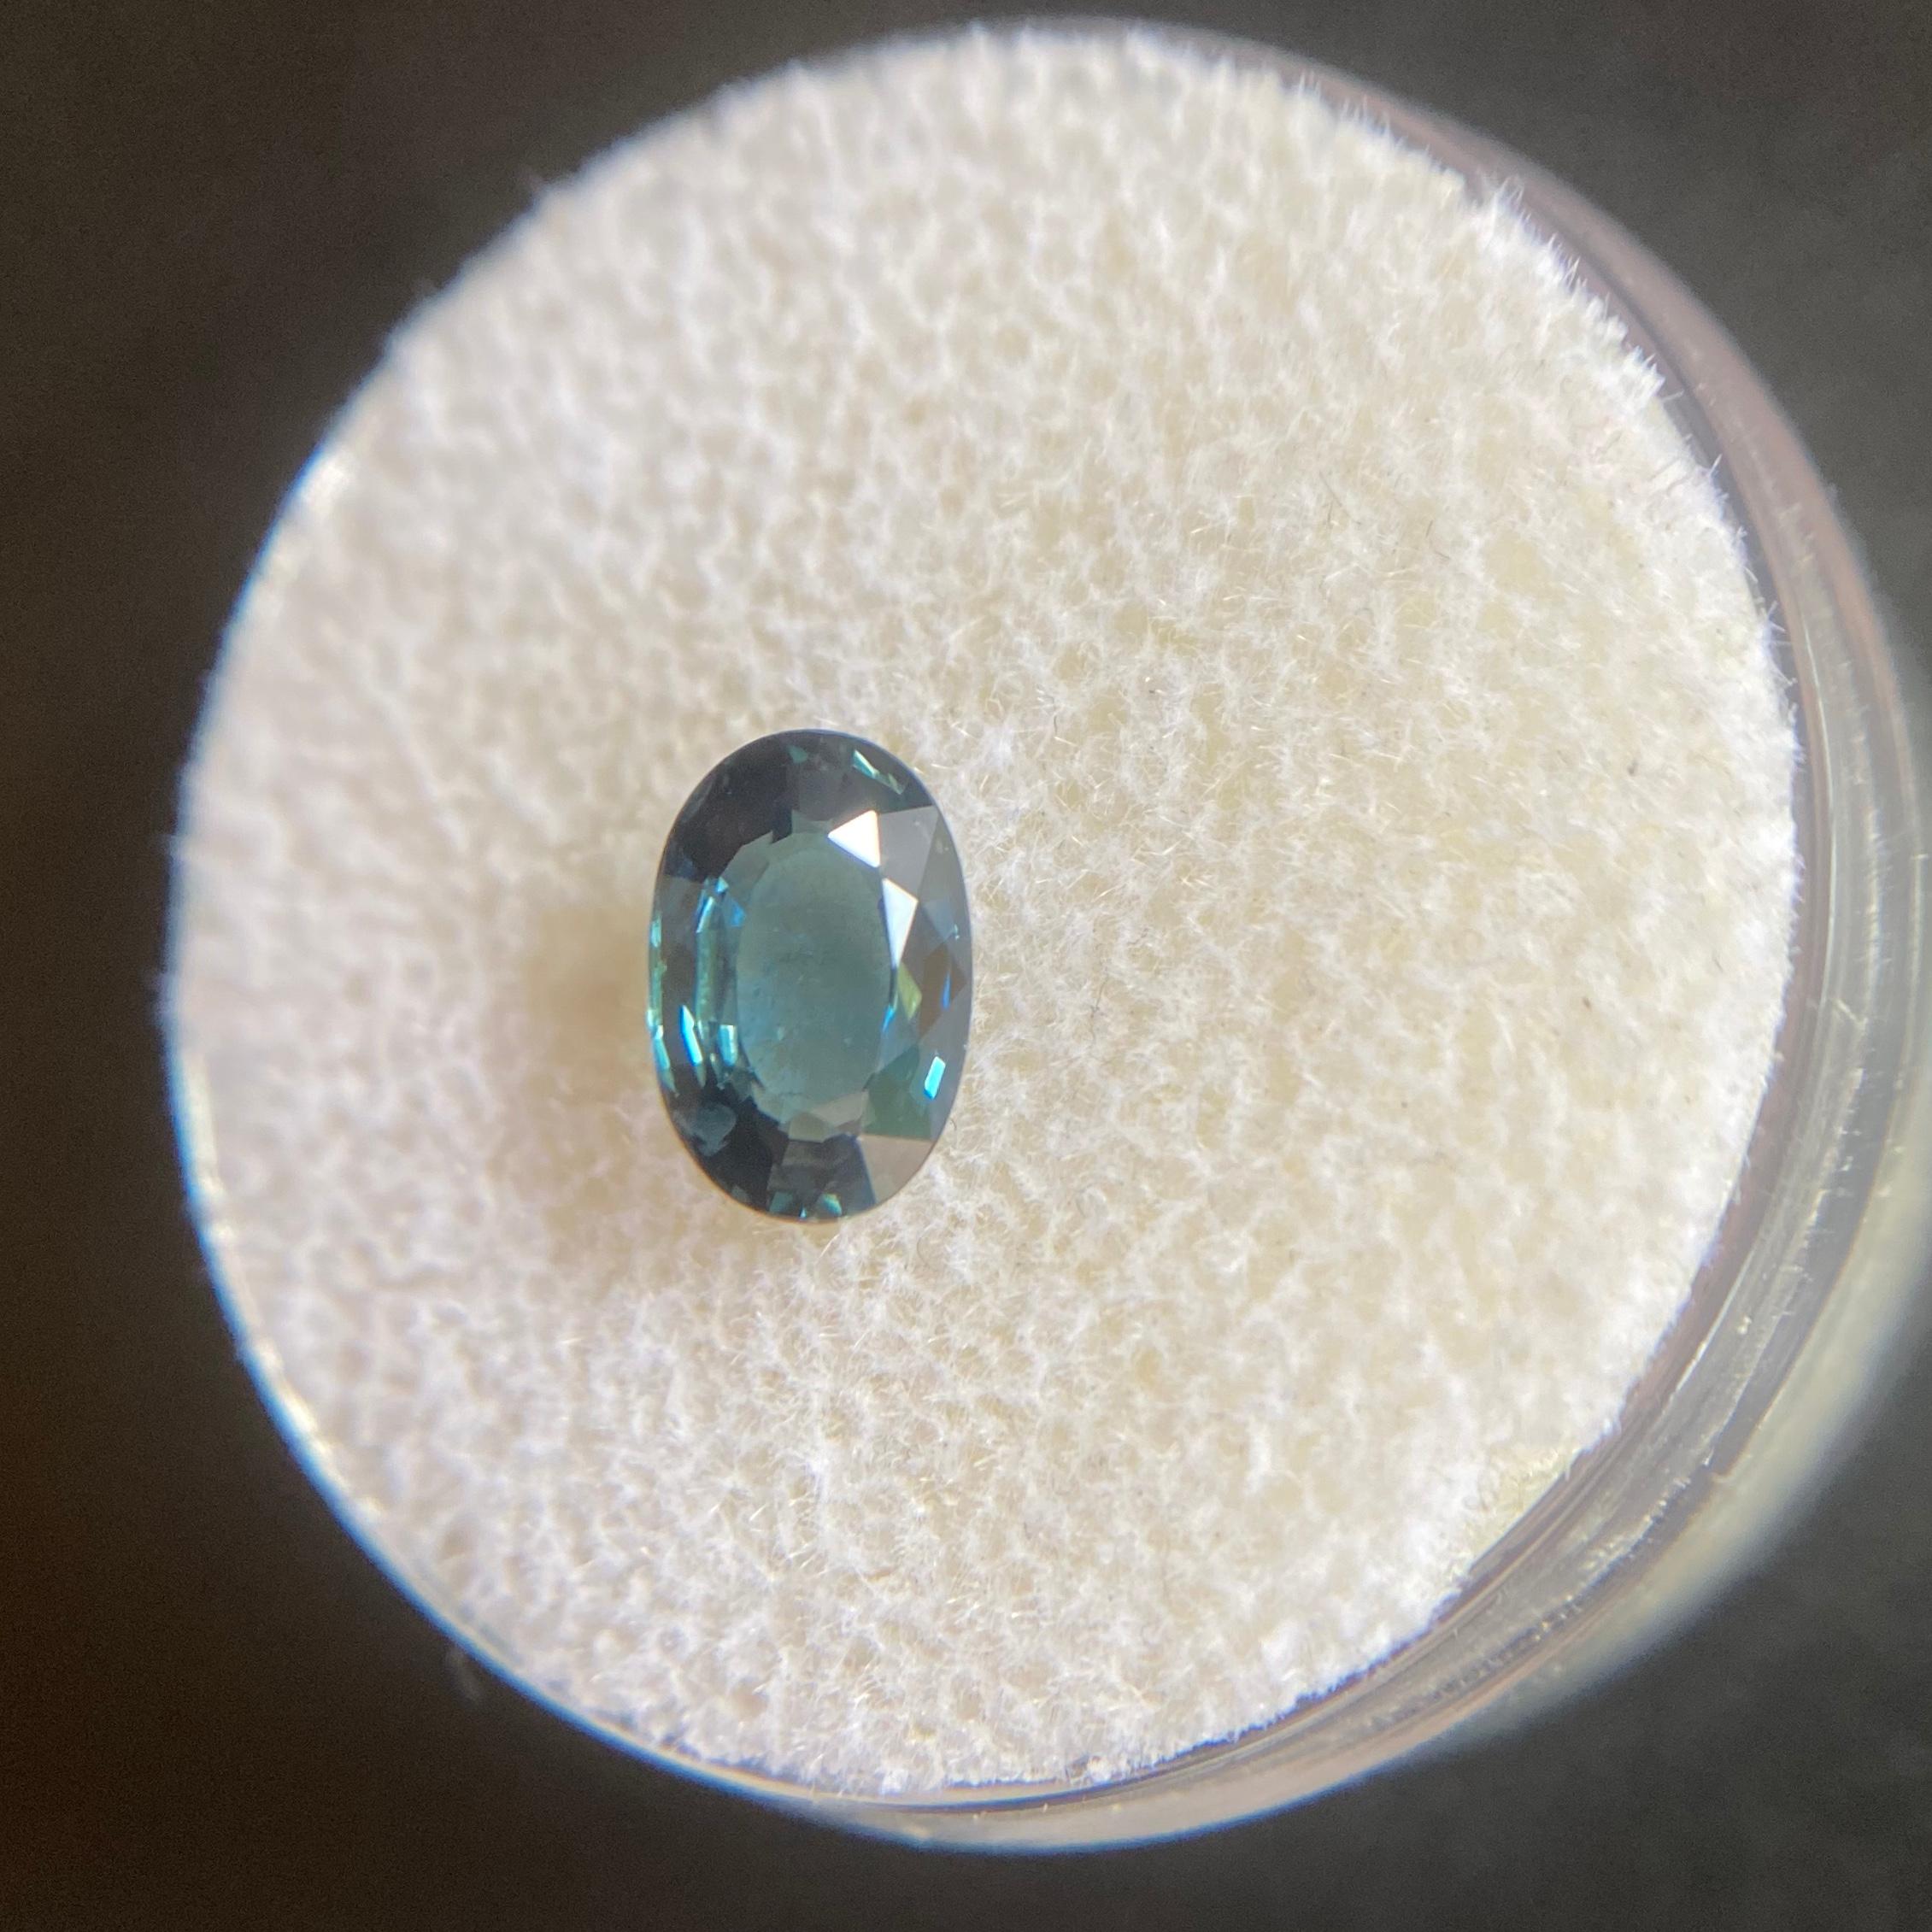 Natural Thailand Blue Sapphire Gemstone IGI Certified.

1.18 Carat stone with a very good oval cut and good clarity. Some small natural inclusions visible when looking closely but not a dirty stone. Fully certified by IGI in Antwerp, one of their